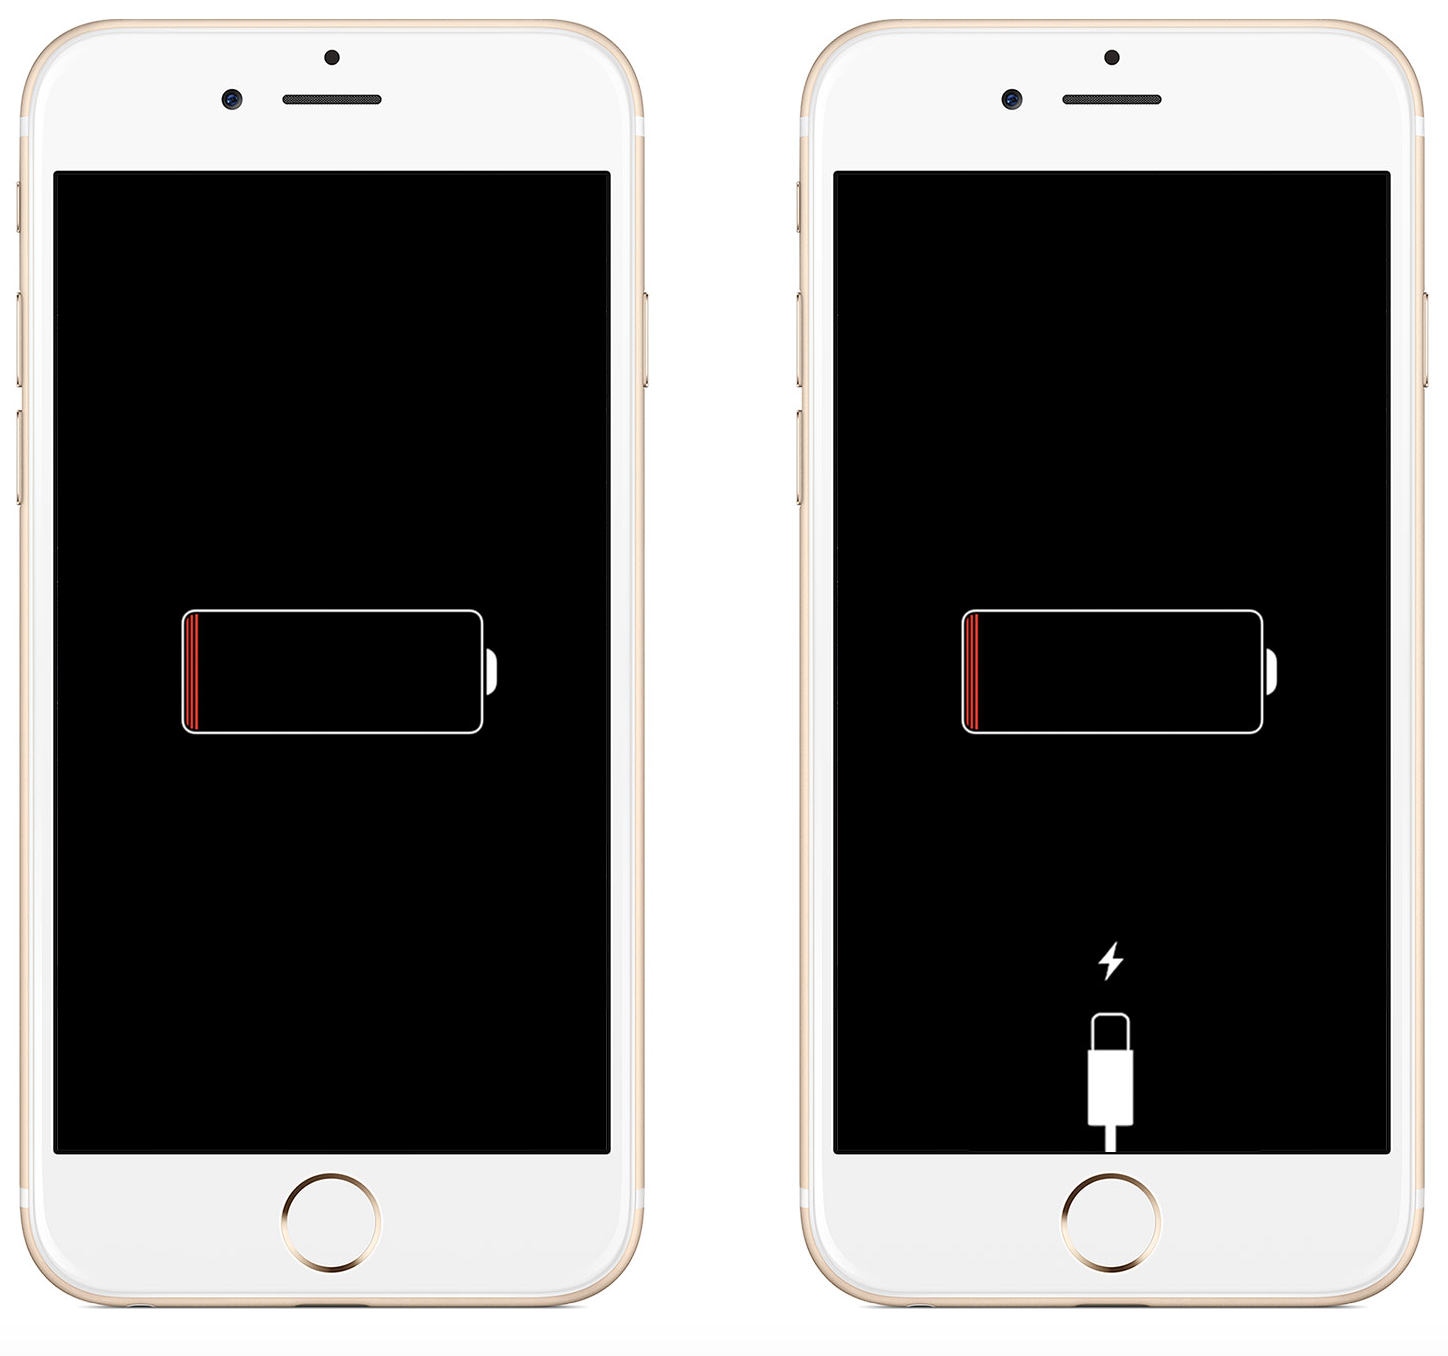 iPhone 6 charging but not on - Apple Community